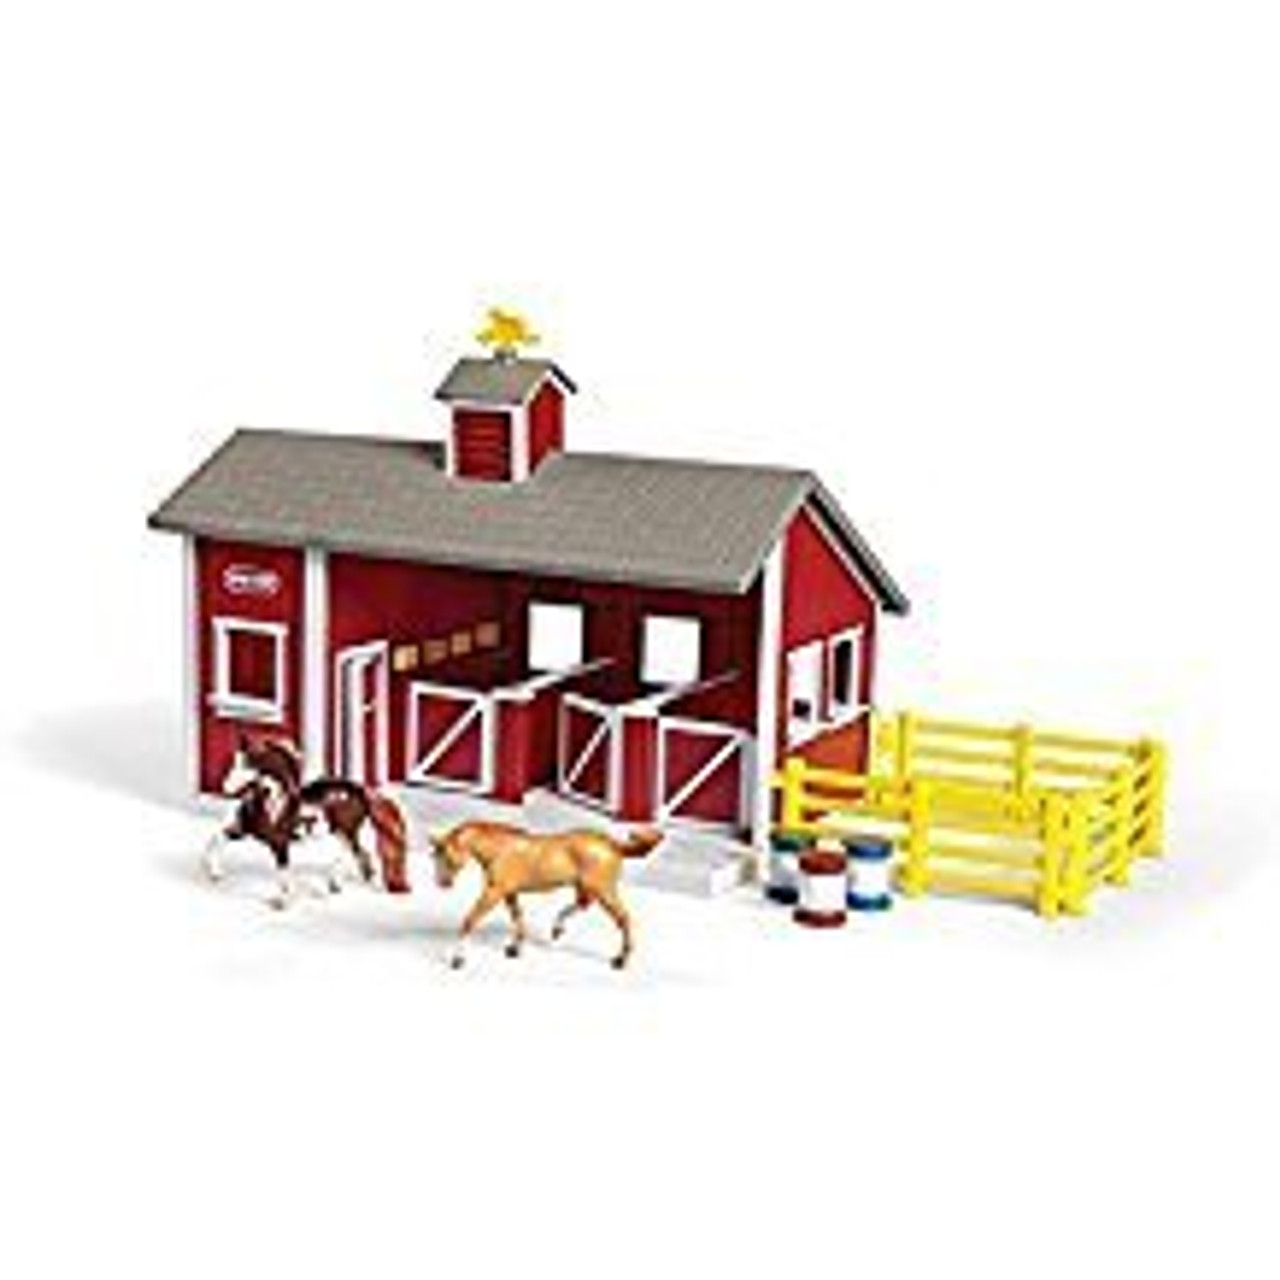 LITTLE RED STABLE SET